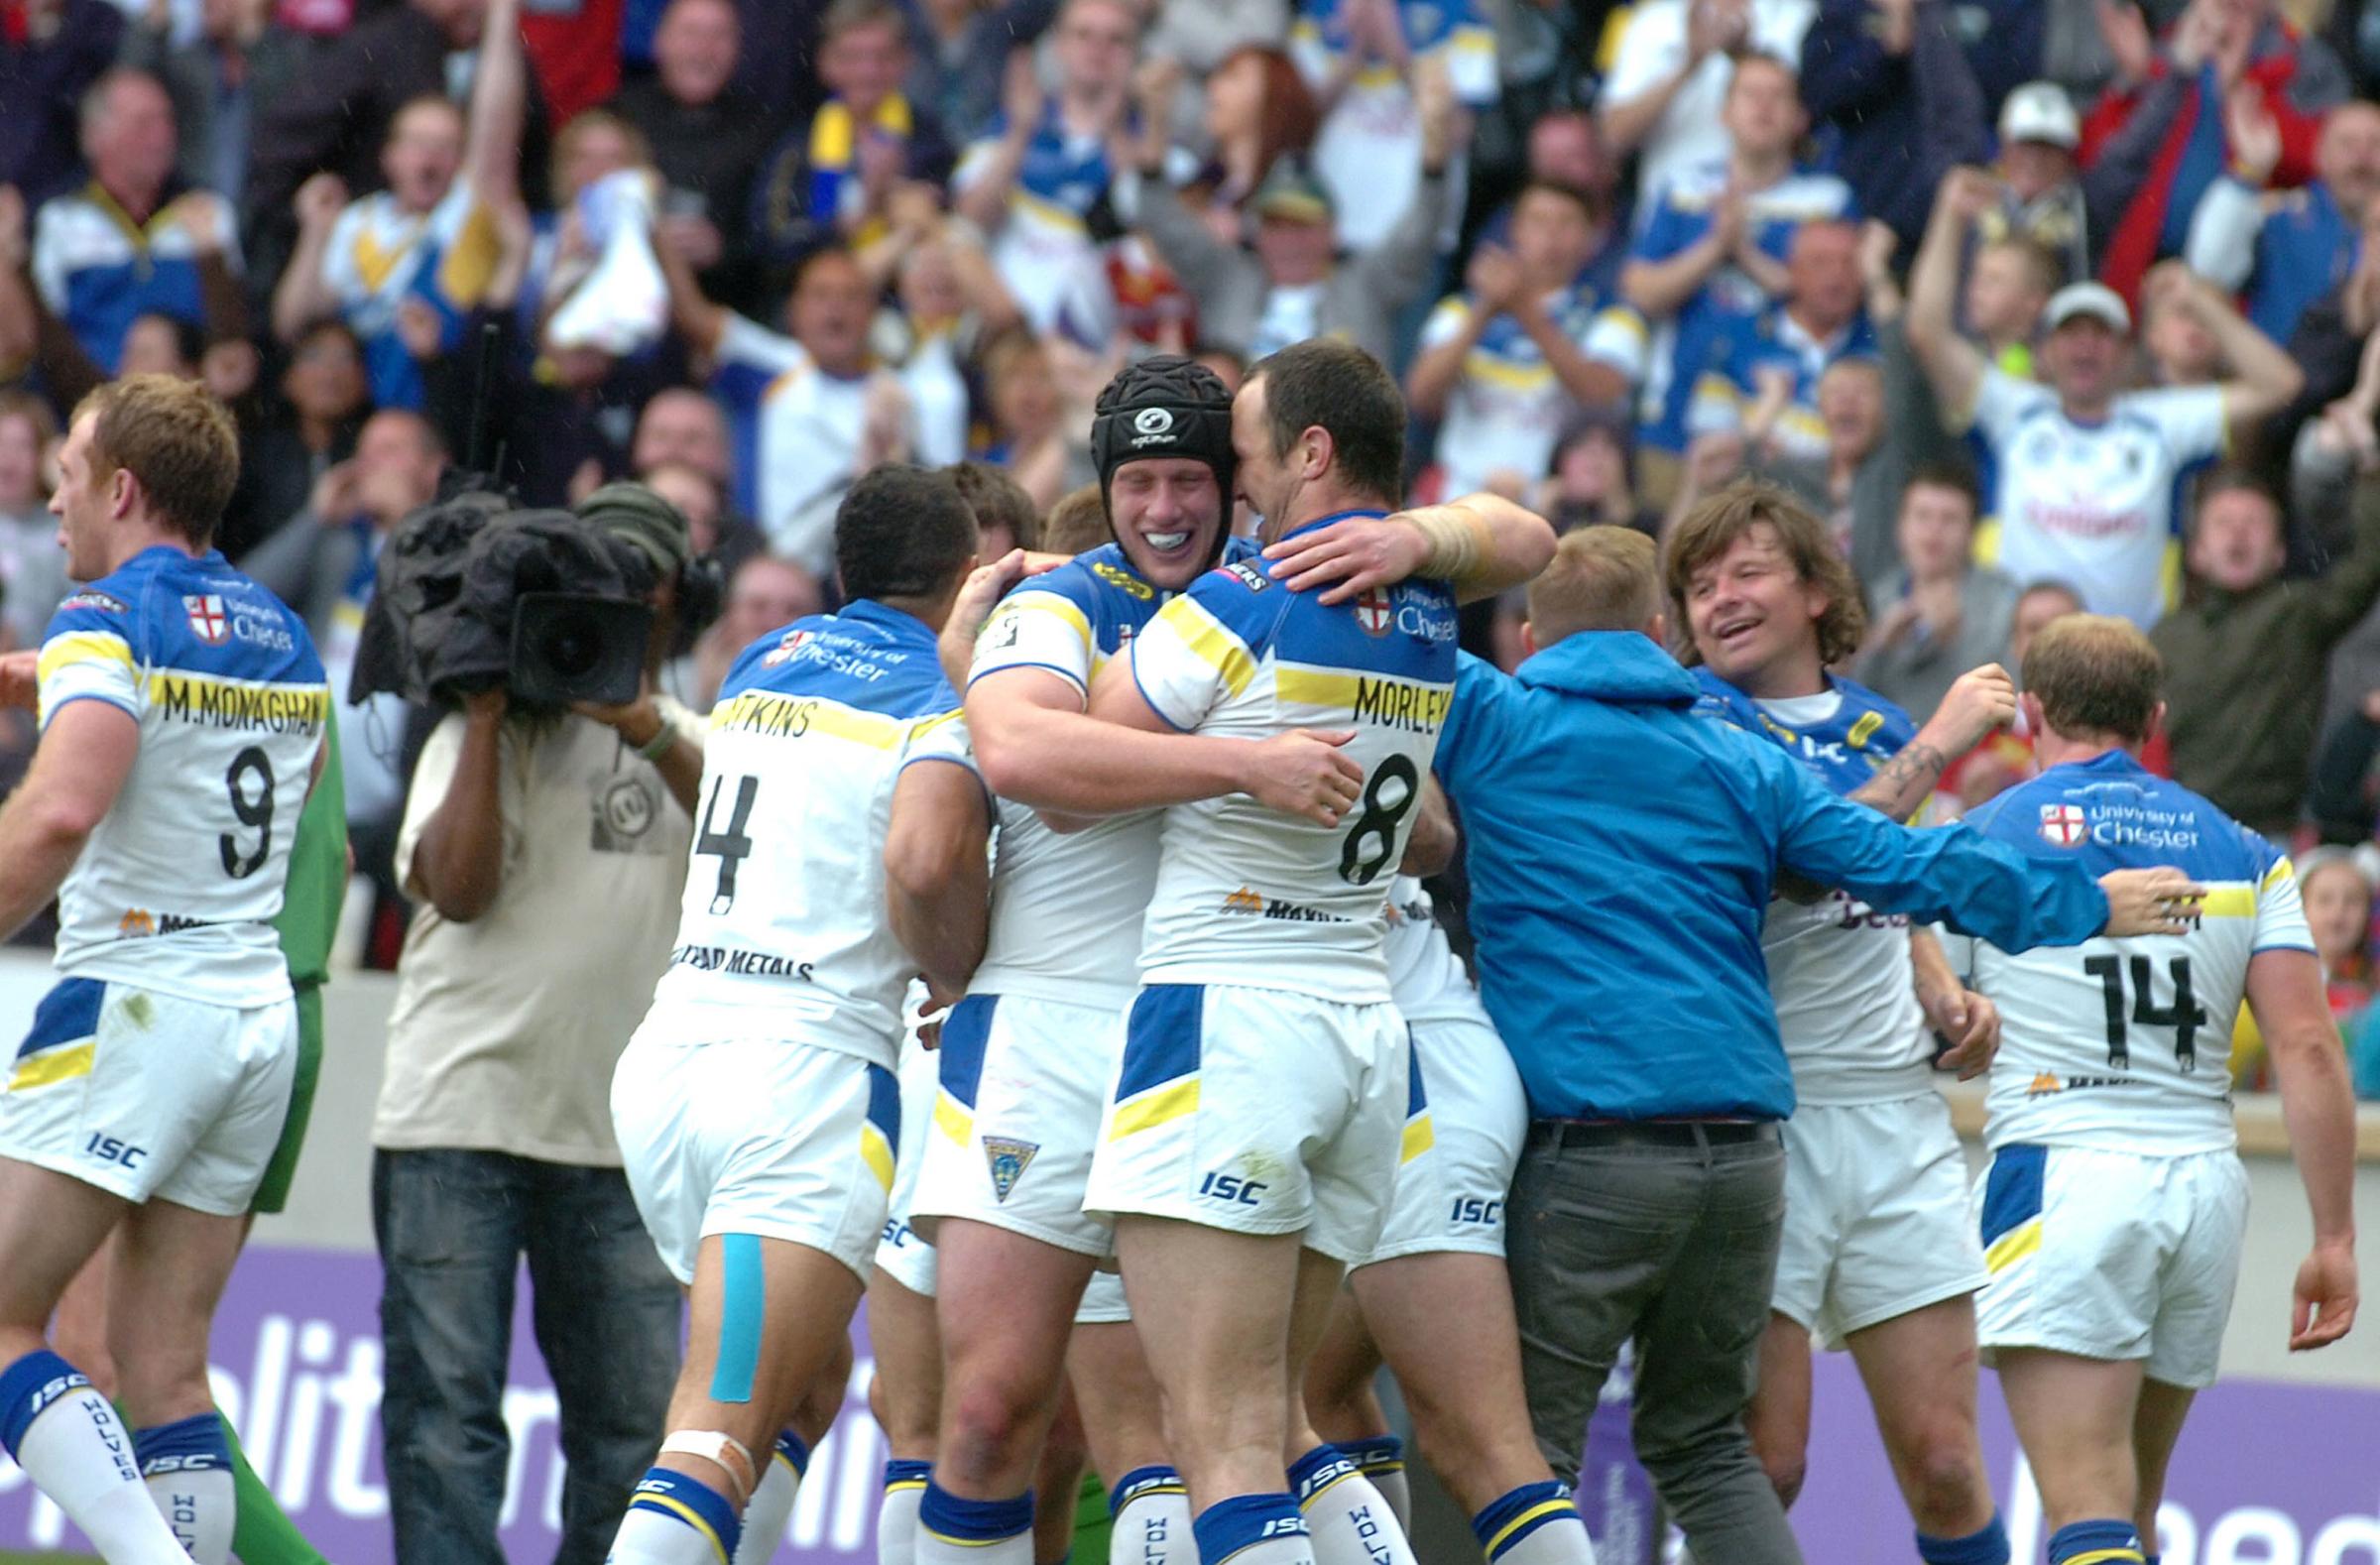 The celebrations that followed the 2012 semi-final win over Huddersfield. Picture by Mike Boden